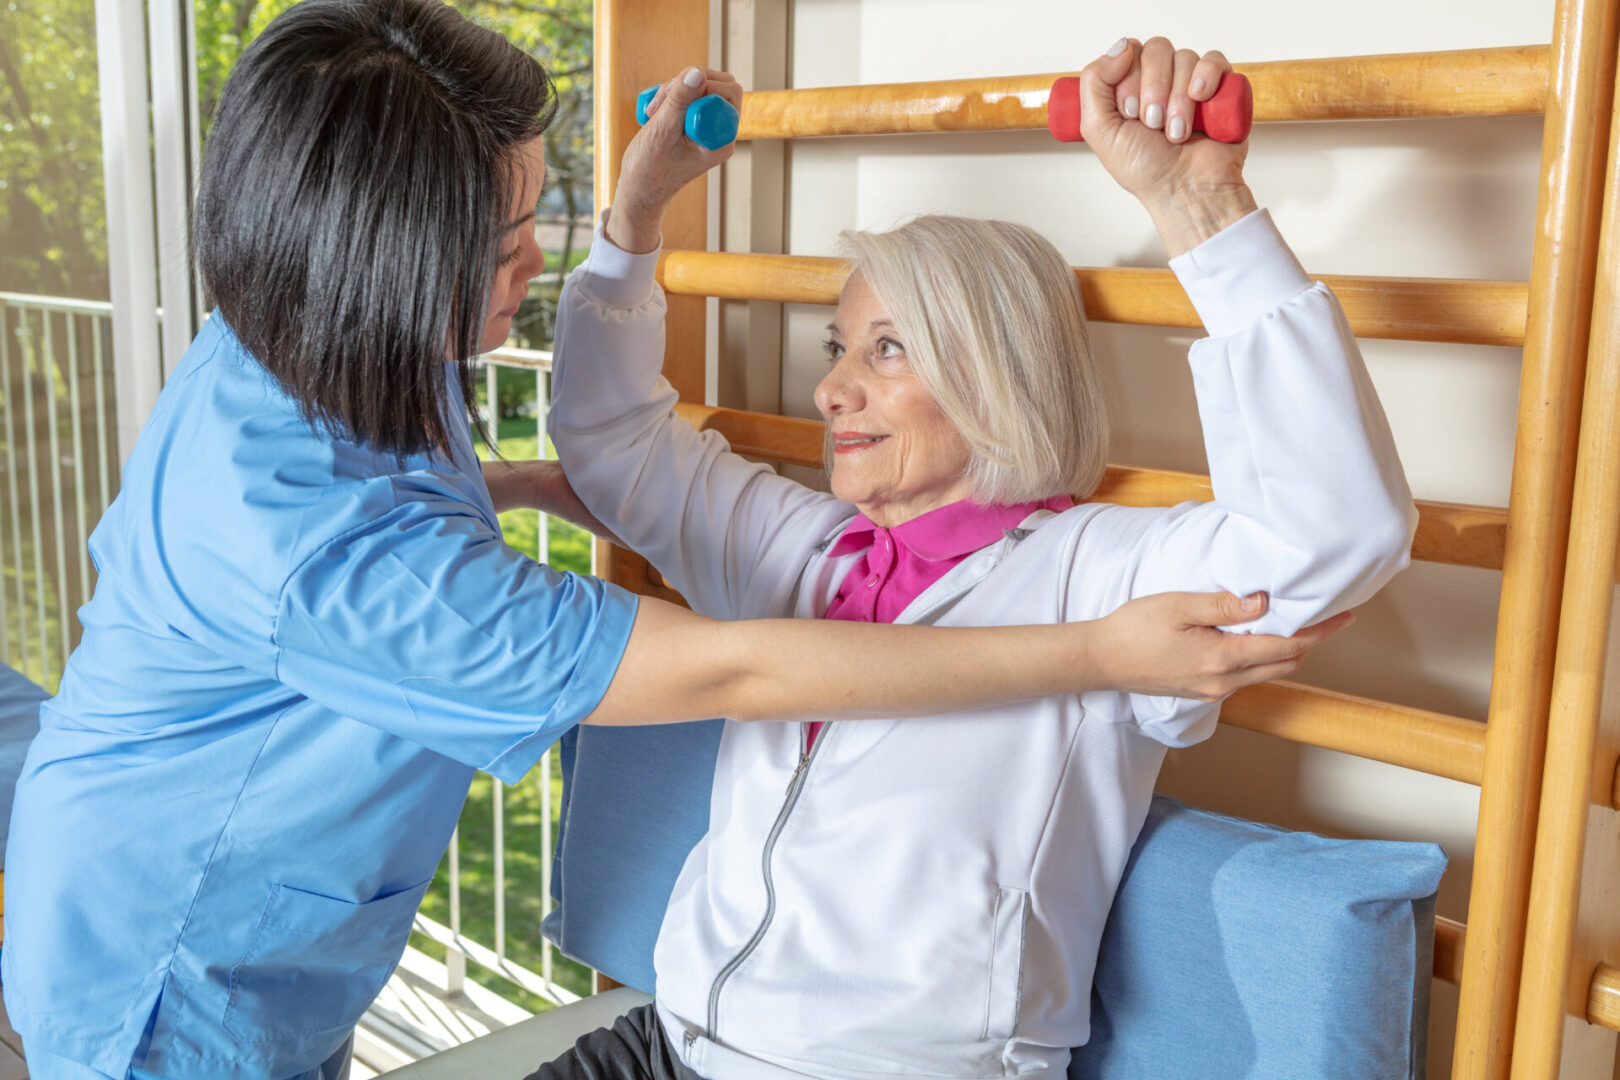 A woman is helping an older person exercise.